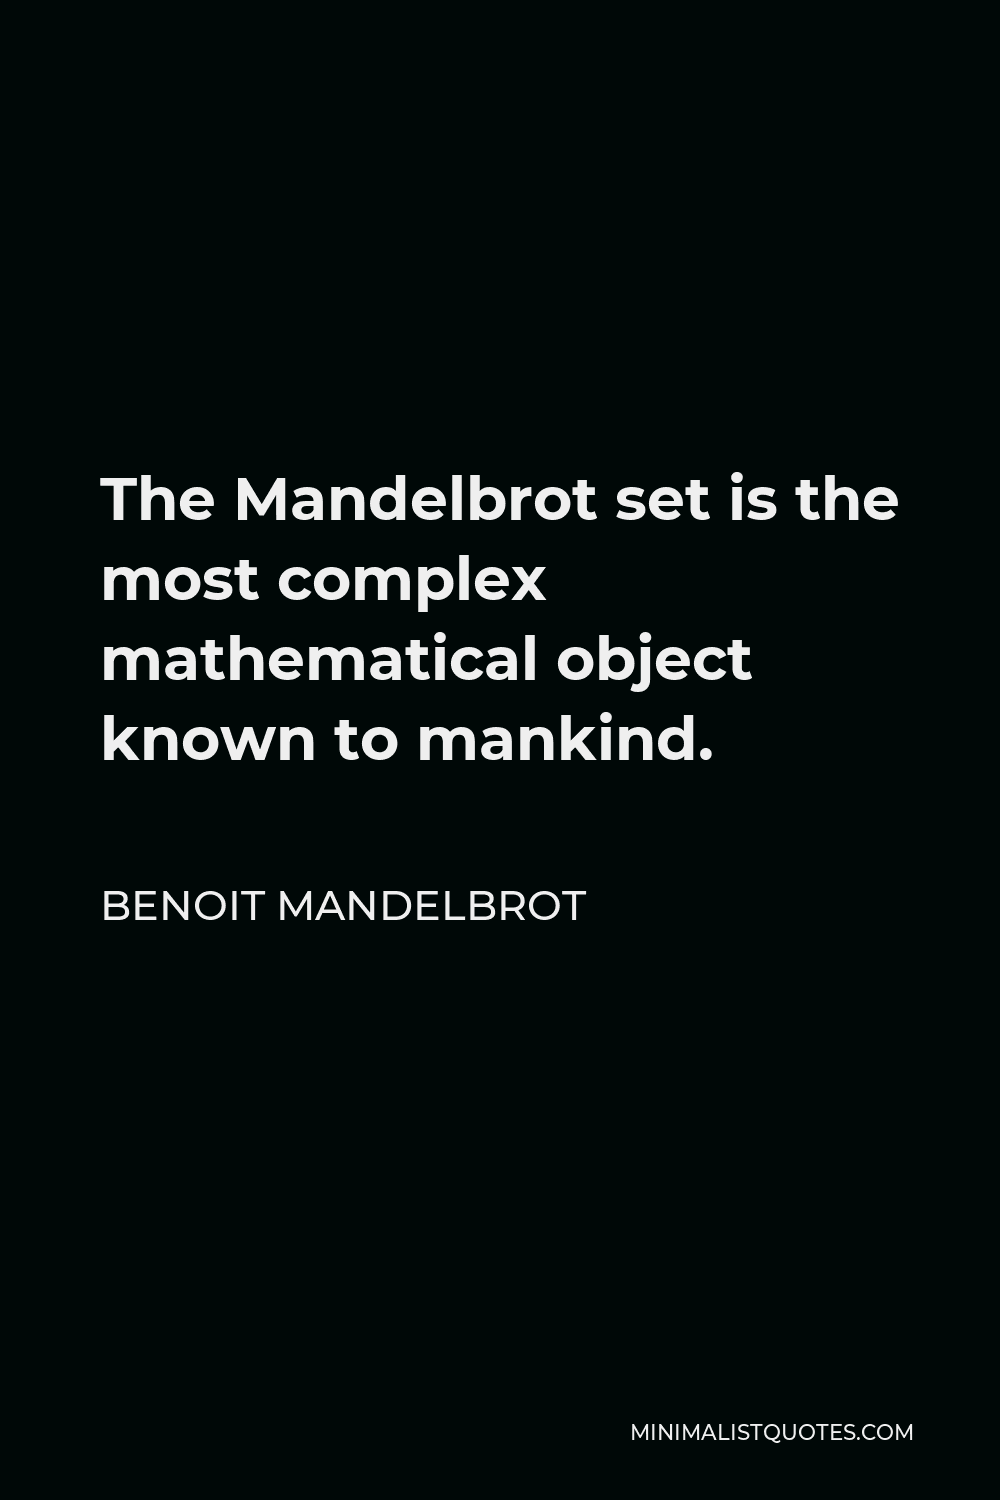 Benoit Mandelbrot Quote - The Mandelbrot set is the most complex mathematical object known to mankind.